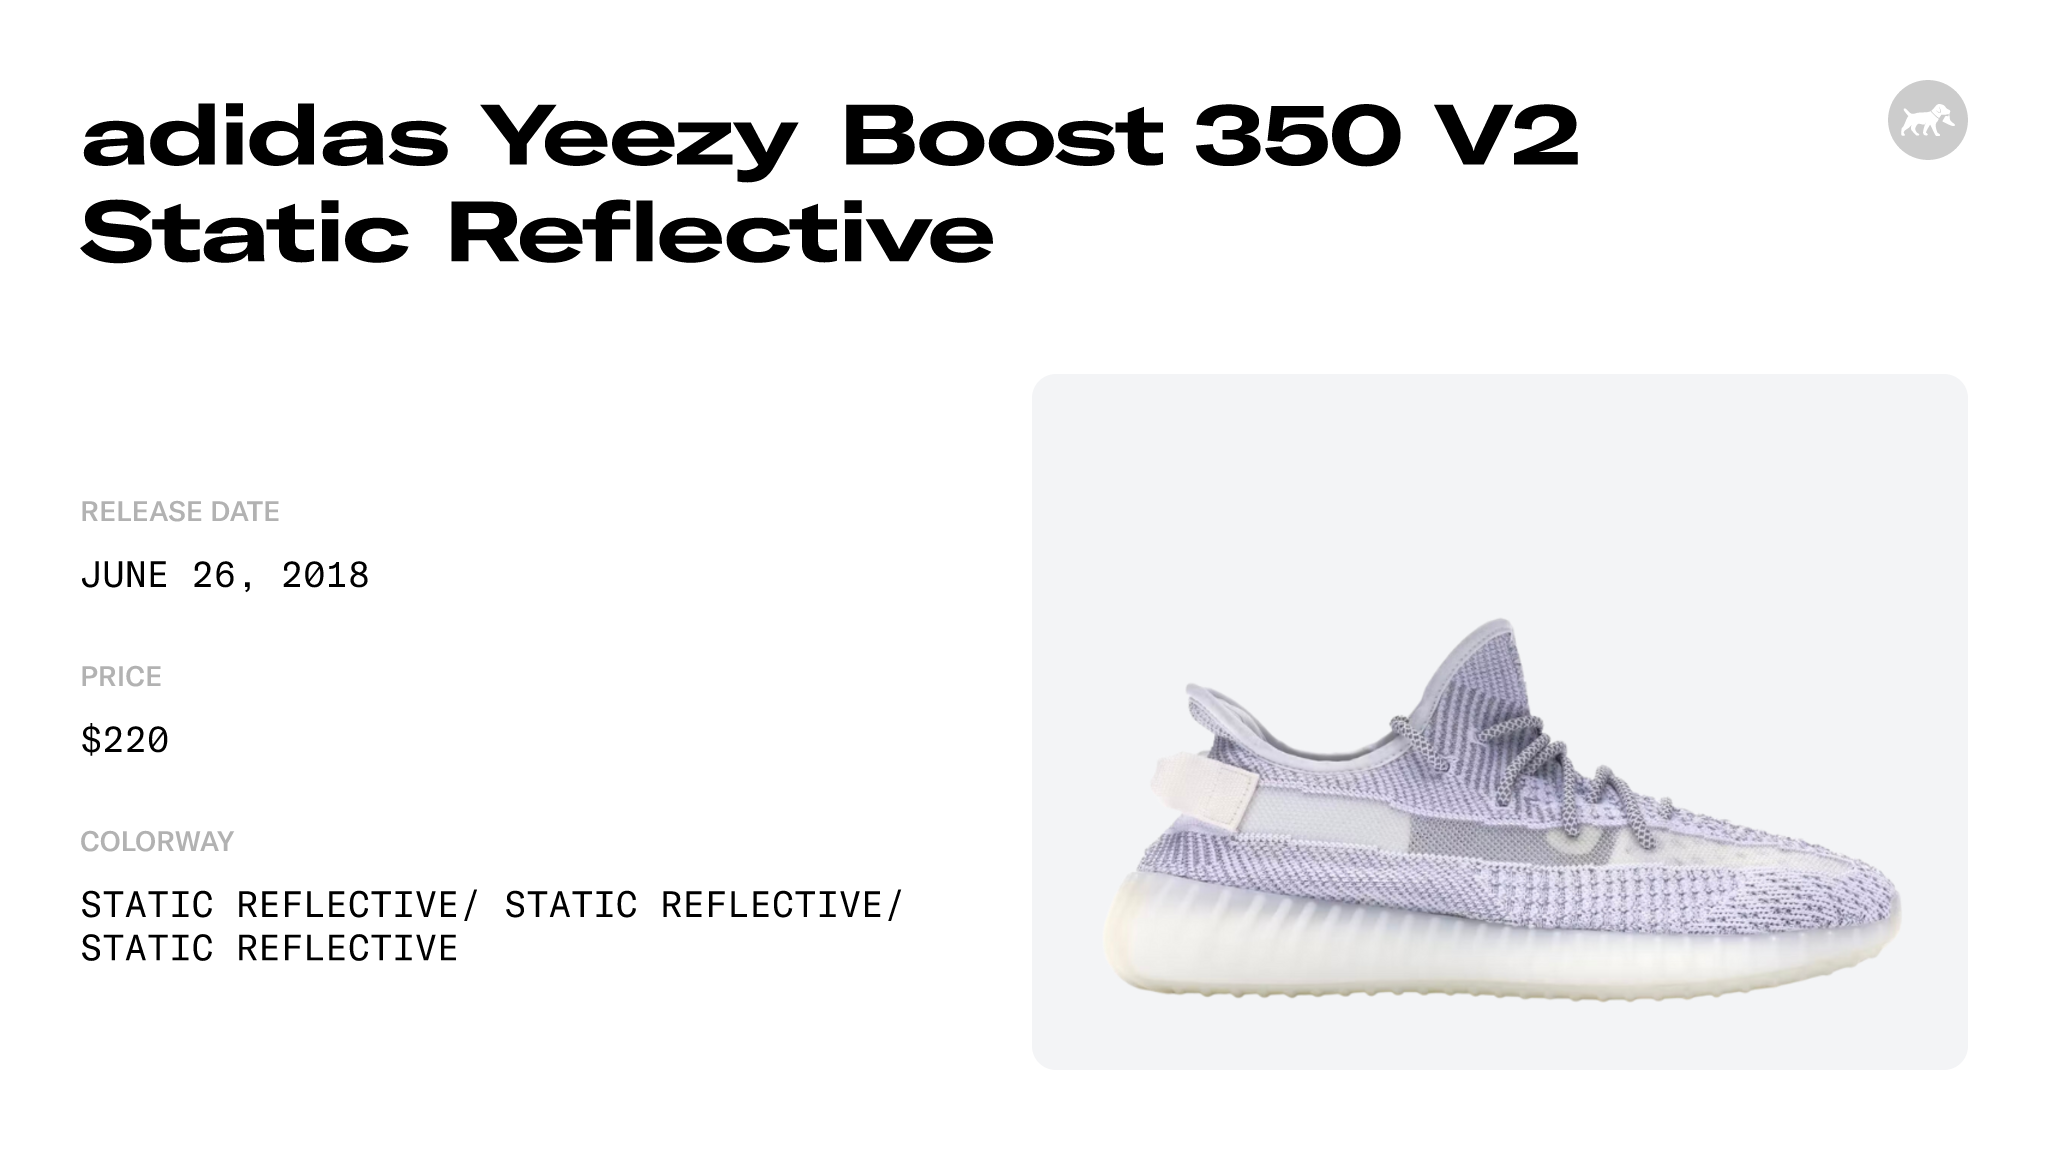 adidas Yeezy Boost 350 V2 Static Reflective - EF2367 Raffles and Release  Date